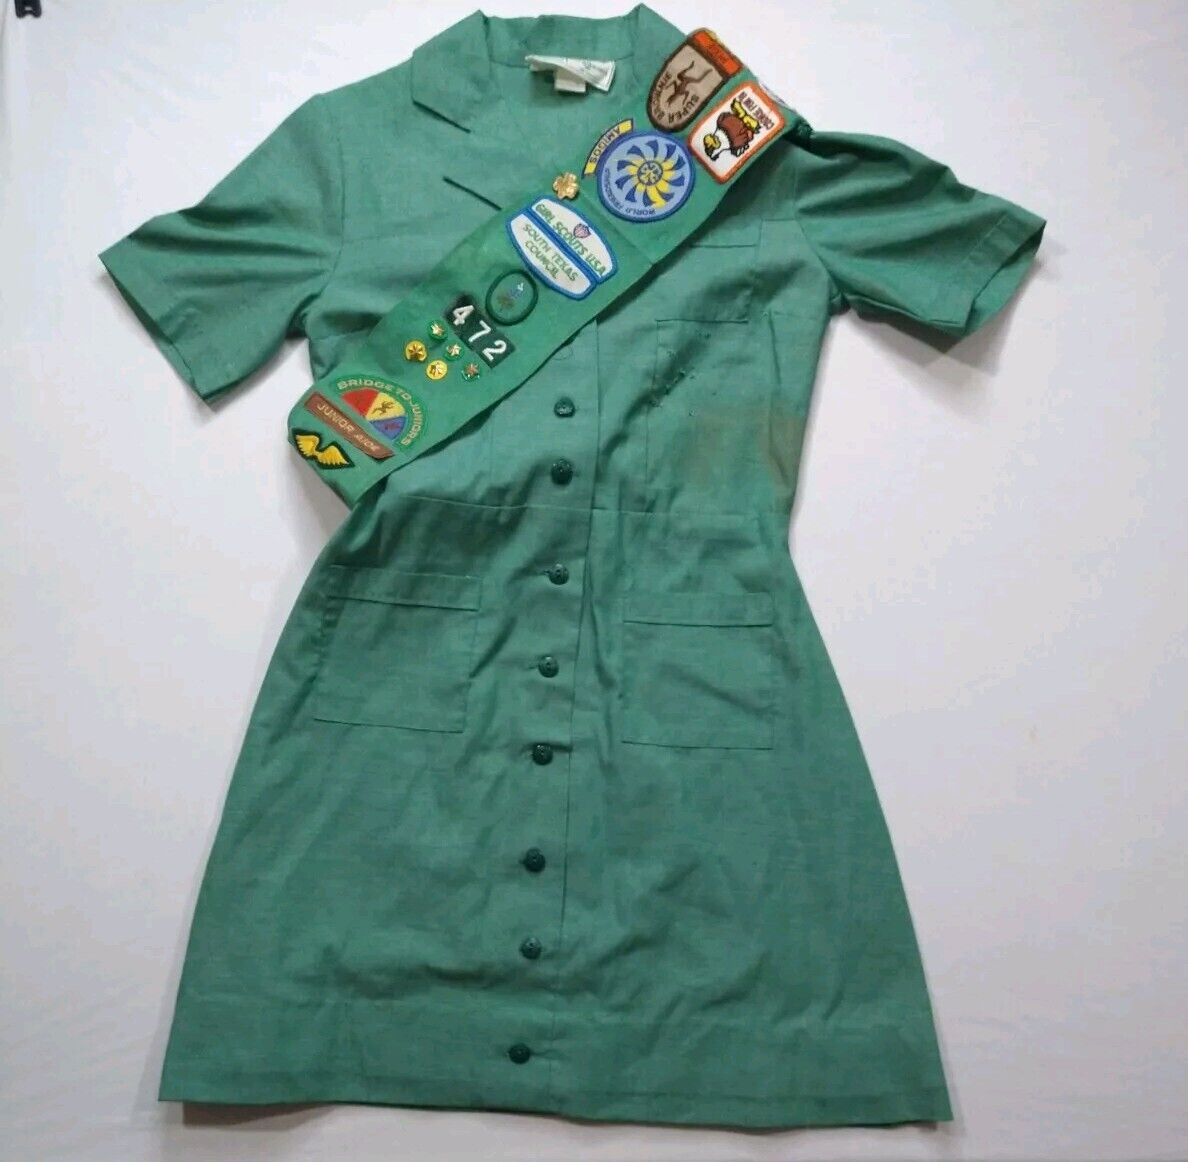 Vintage 1970s Girl Scout South Texas Troop Uniform Dress With Sash Badges Pins